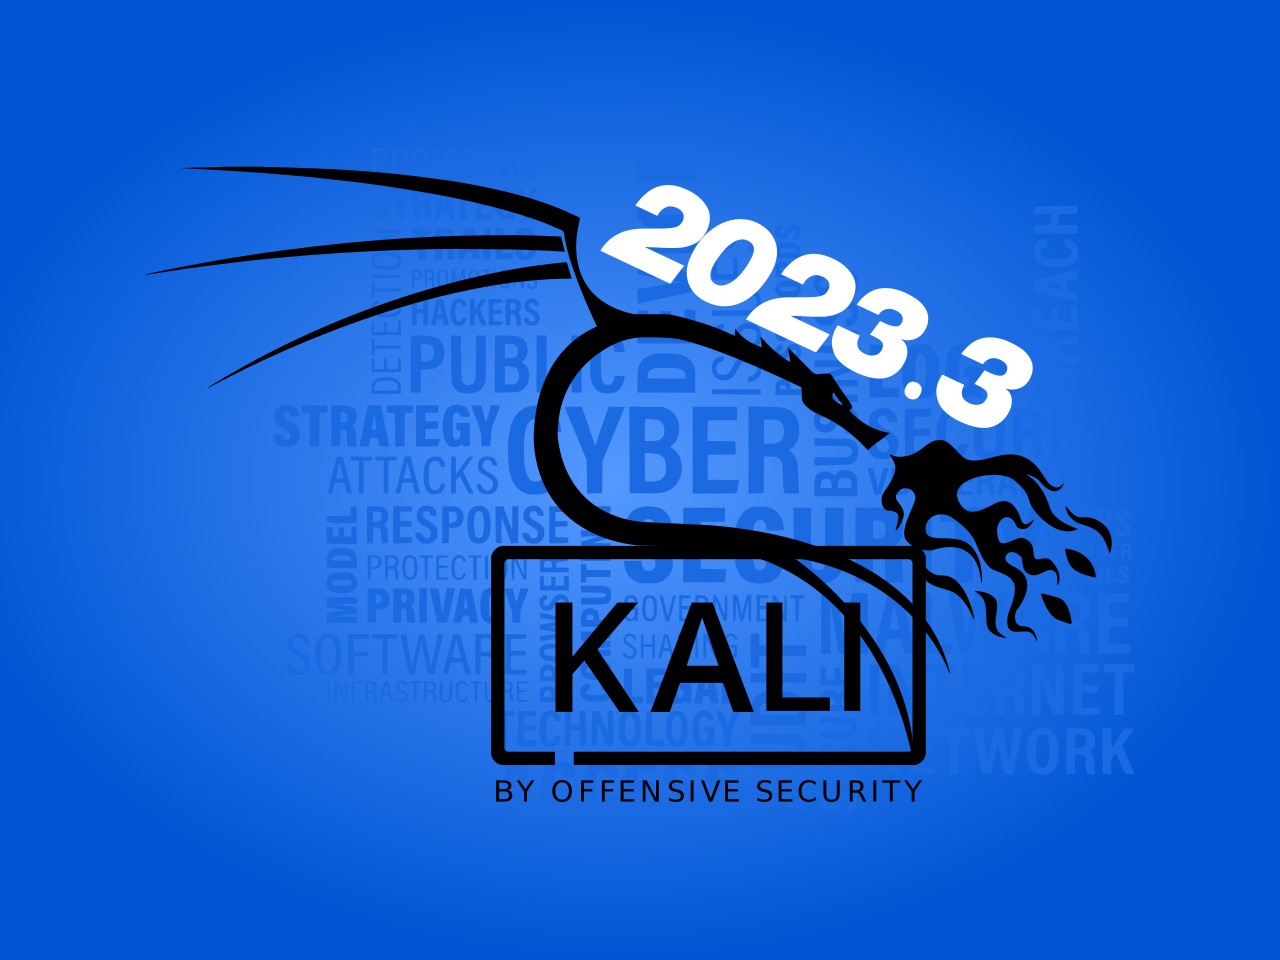 Kali Linux: What You Must Know Before Using It